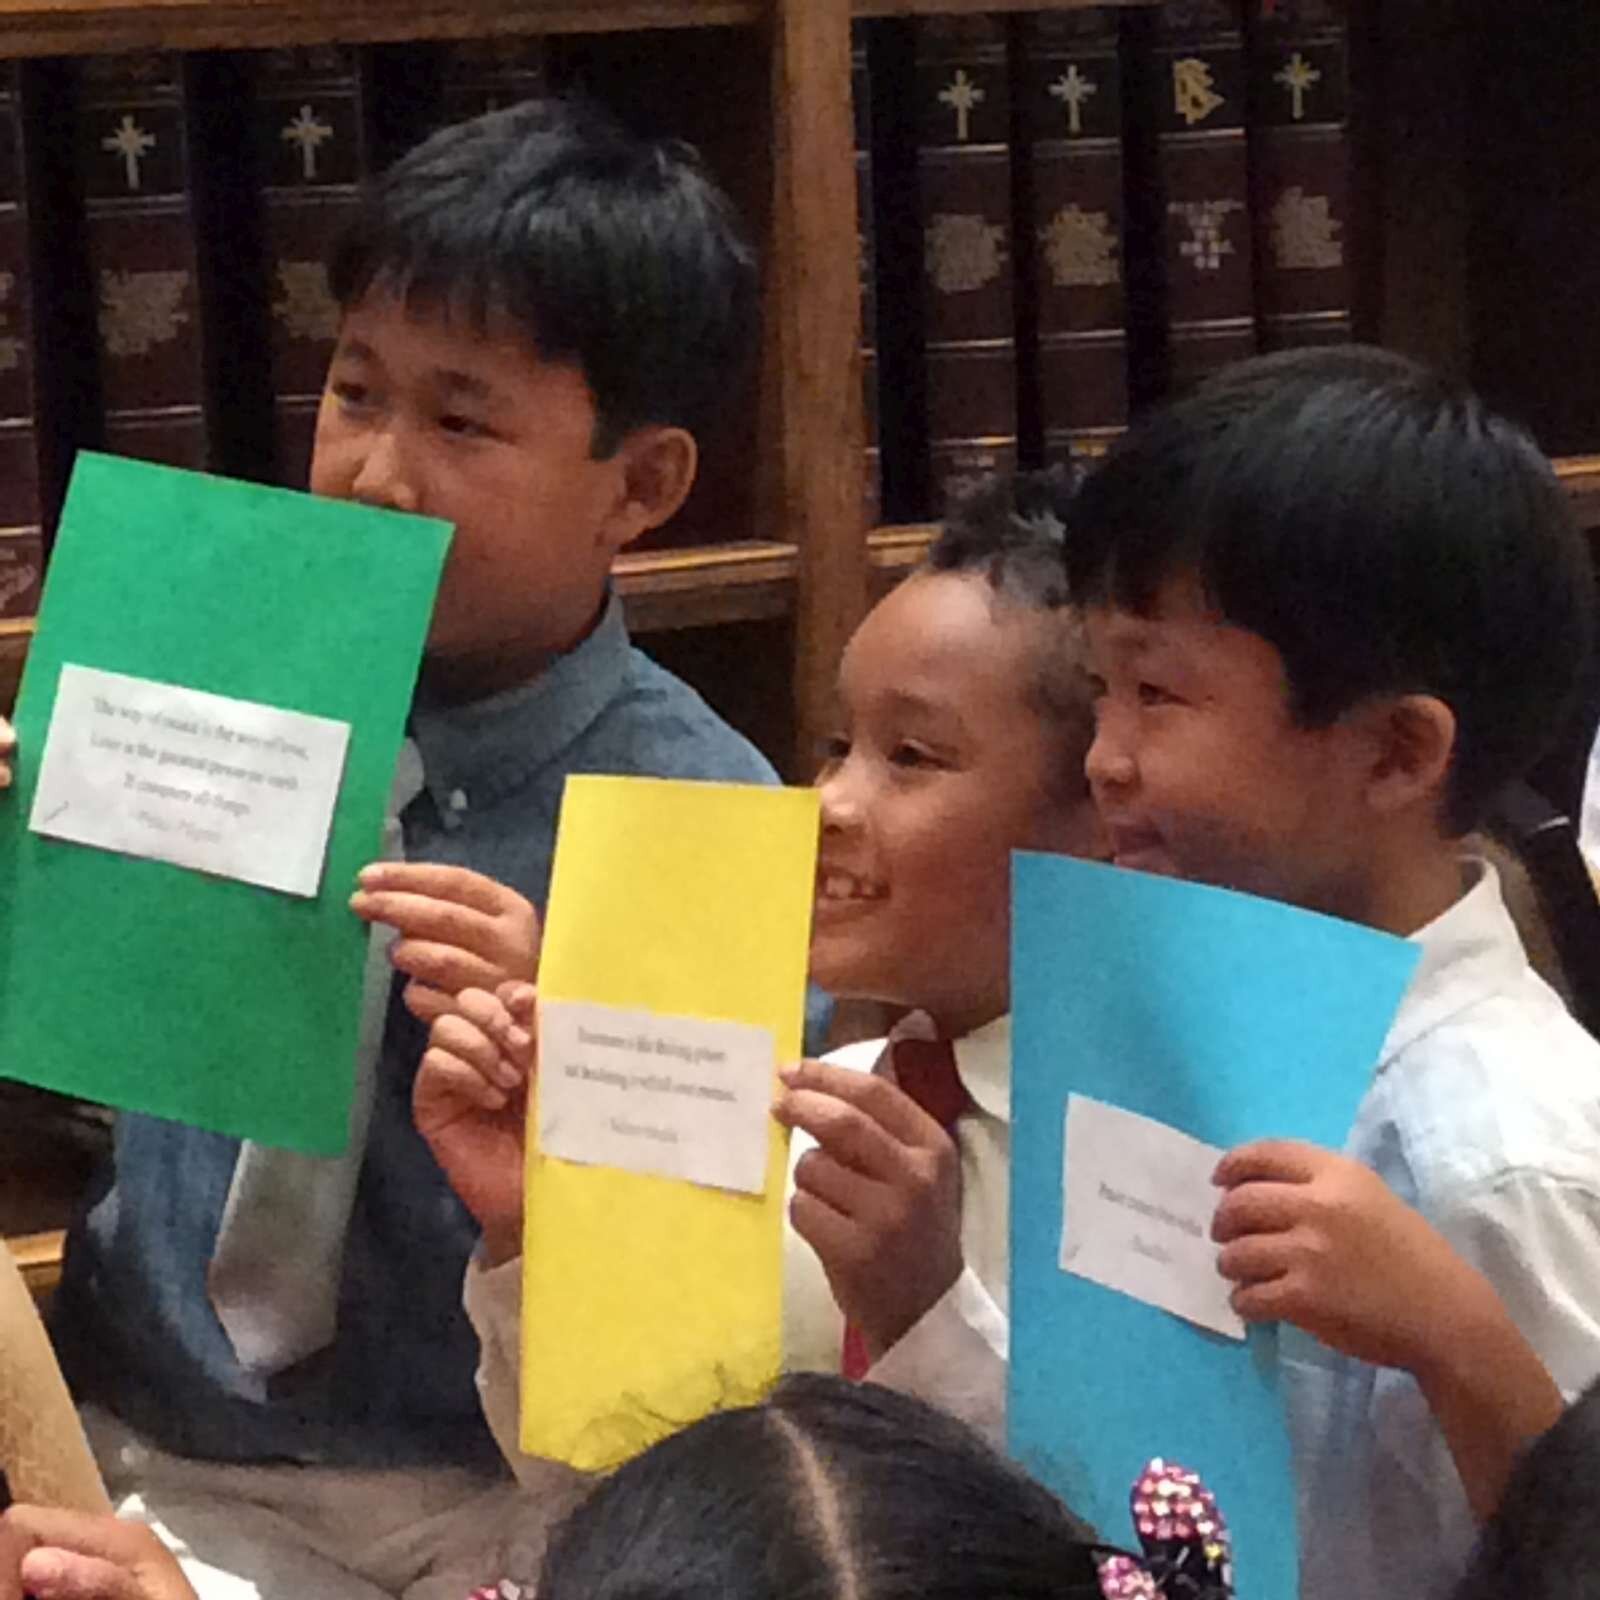 Some of the children who read peace quotes